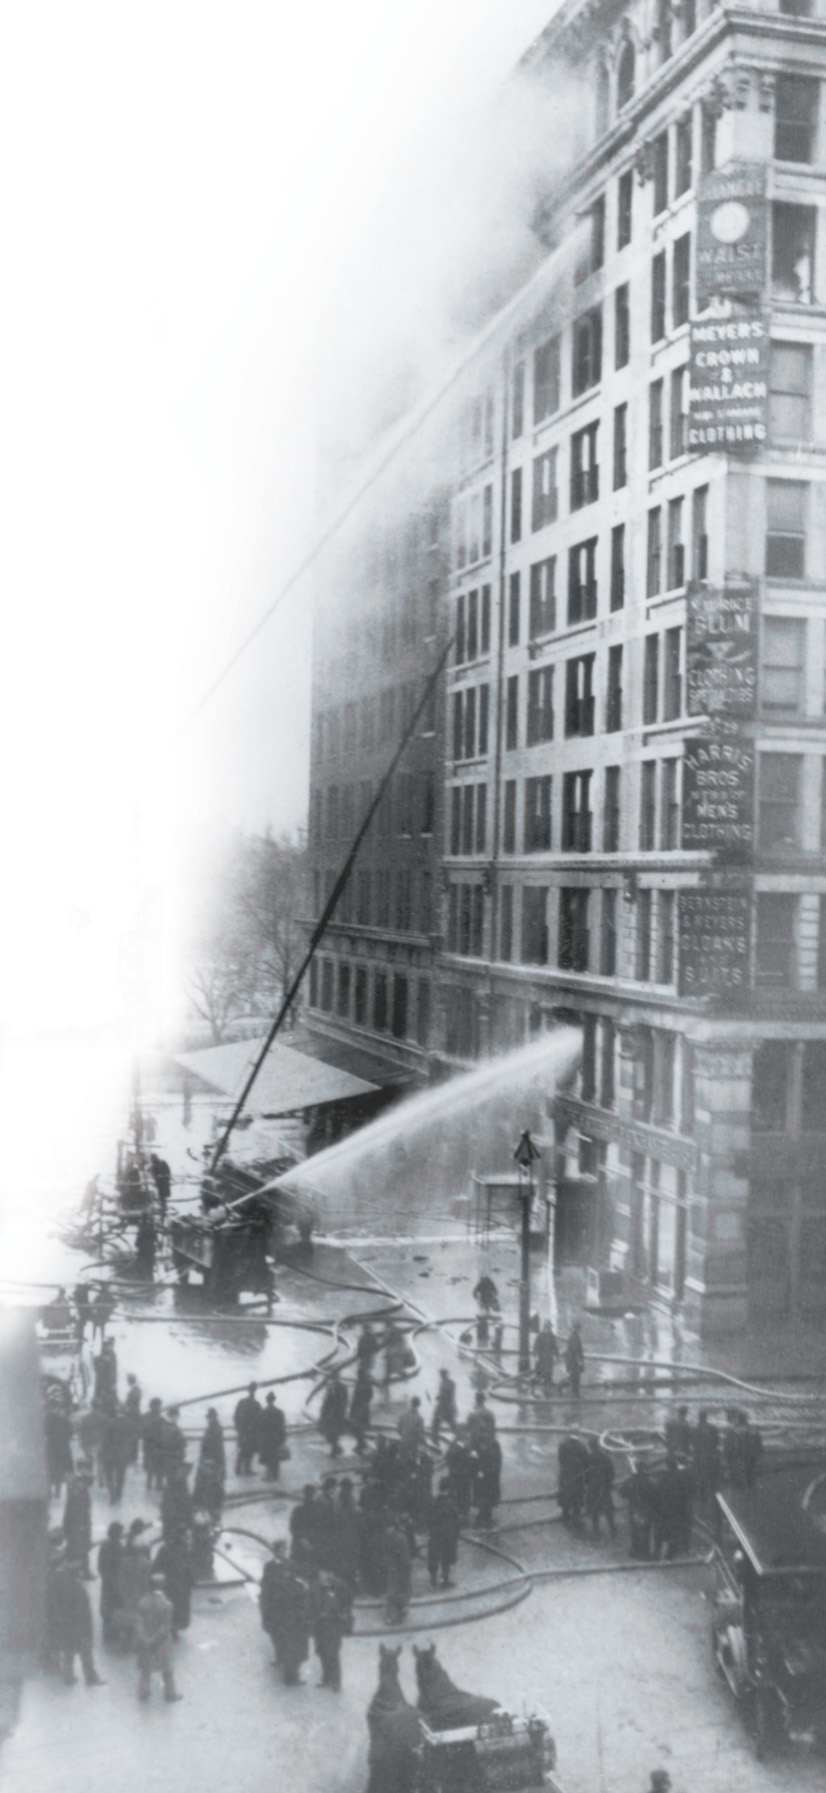 A photo: firemen spray water at a burning ten-story building.